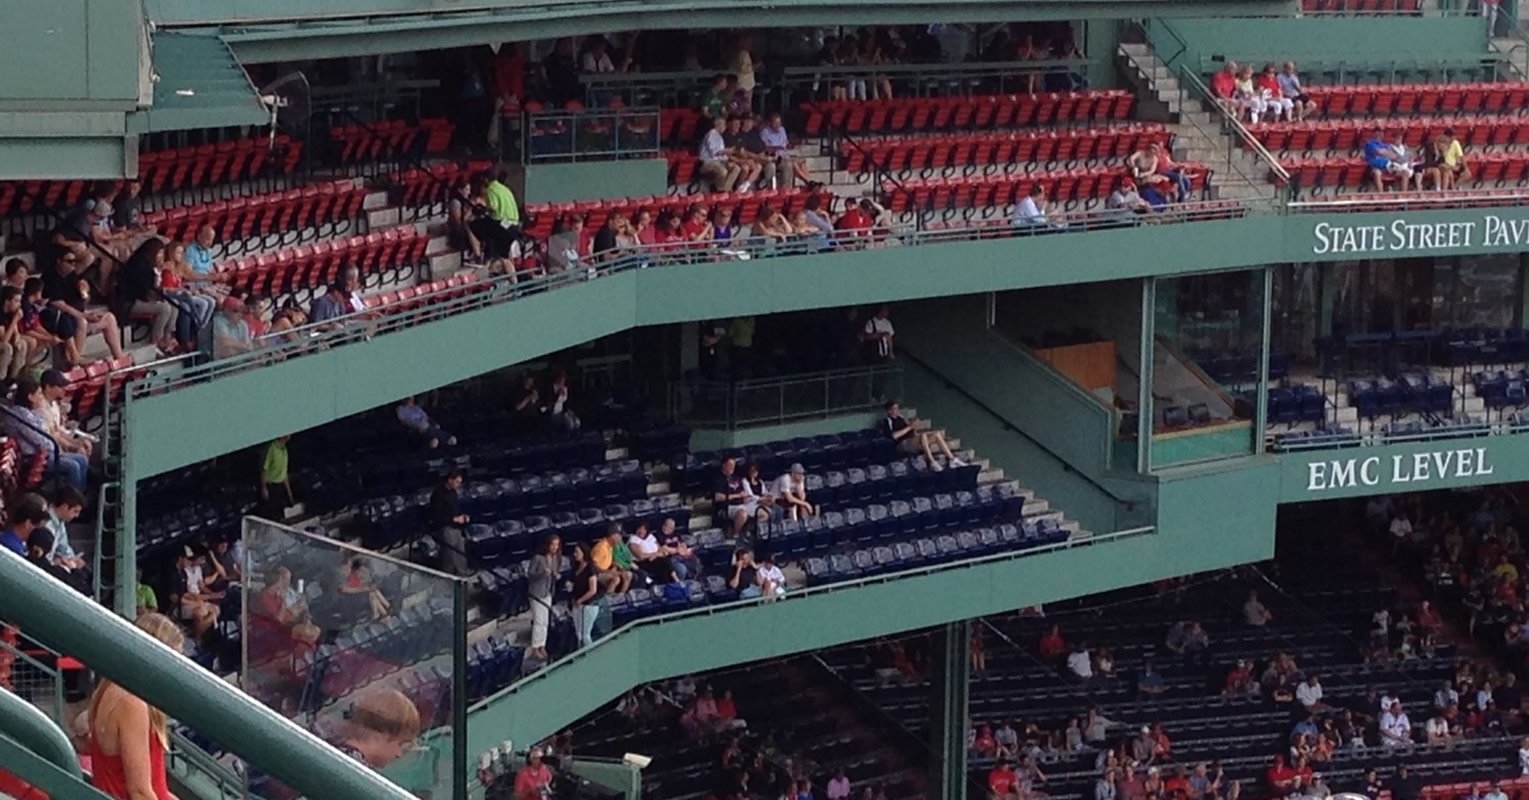 Fenway Park Tickets Seating Chart